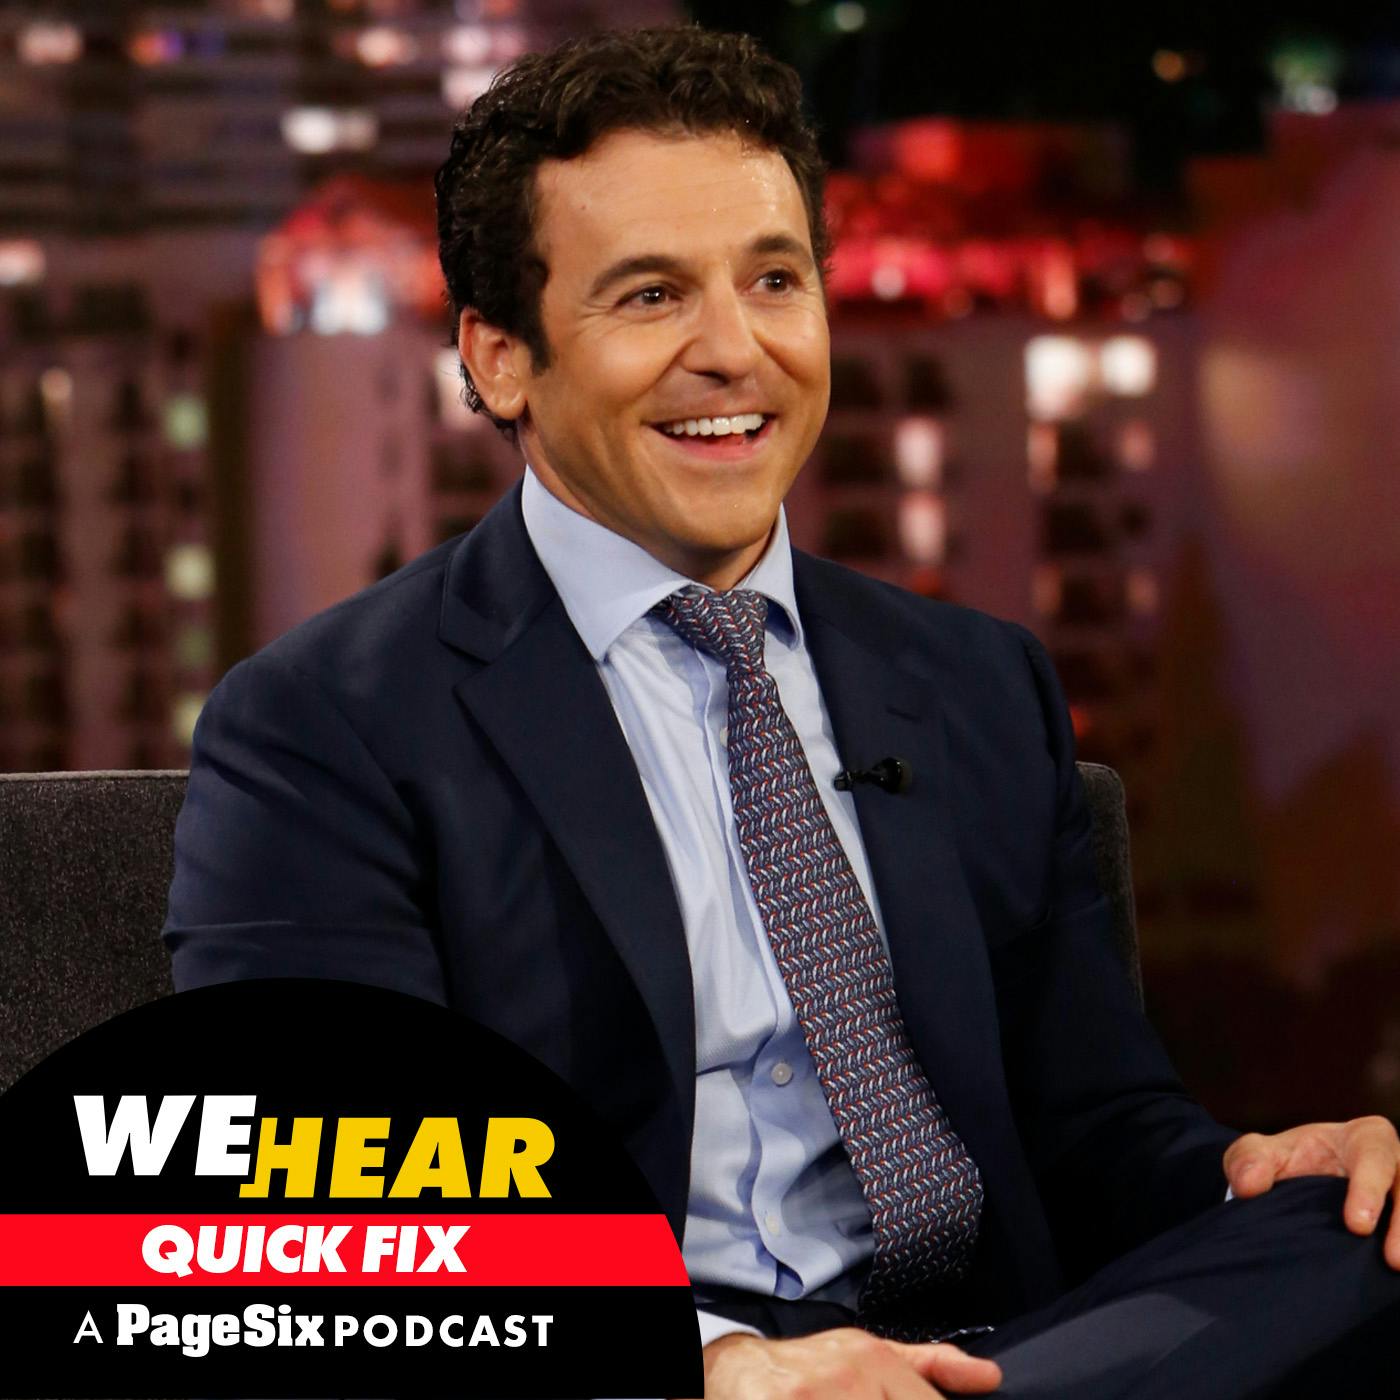 Fred Savage is 'self-reflecting' after 'Wonder Years' reboot firing, more